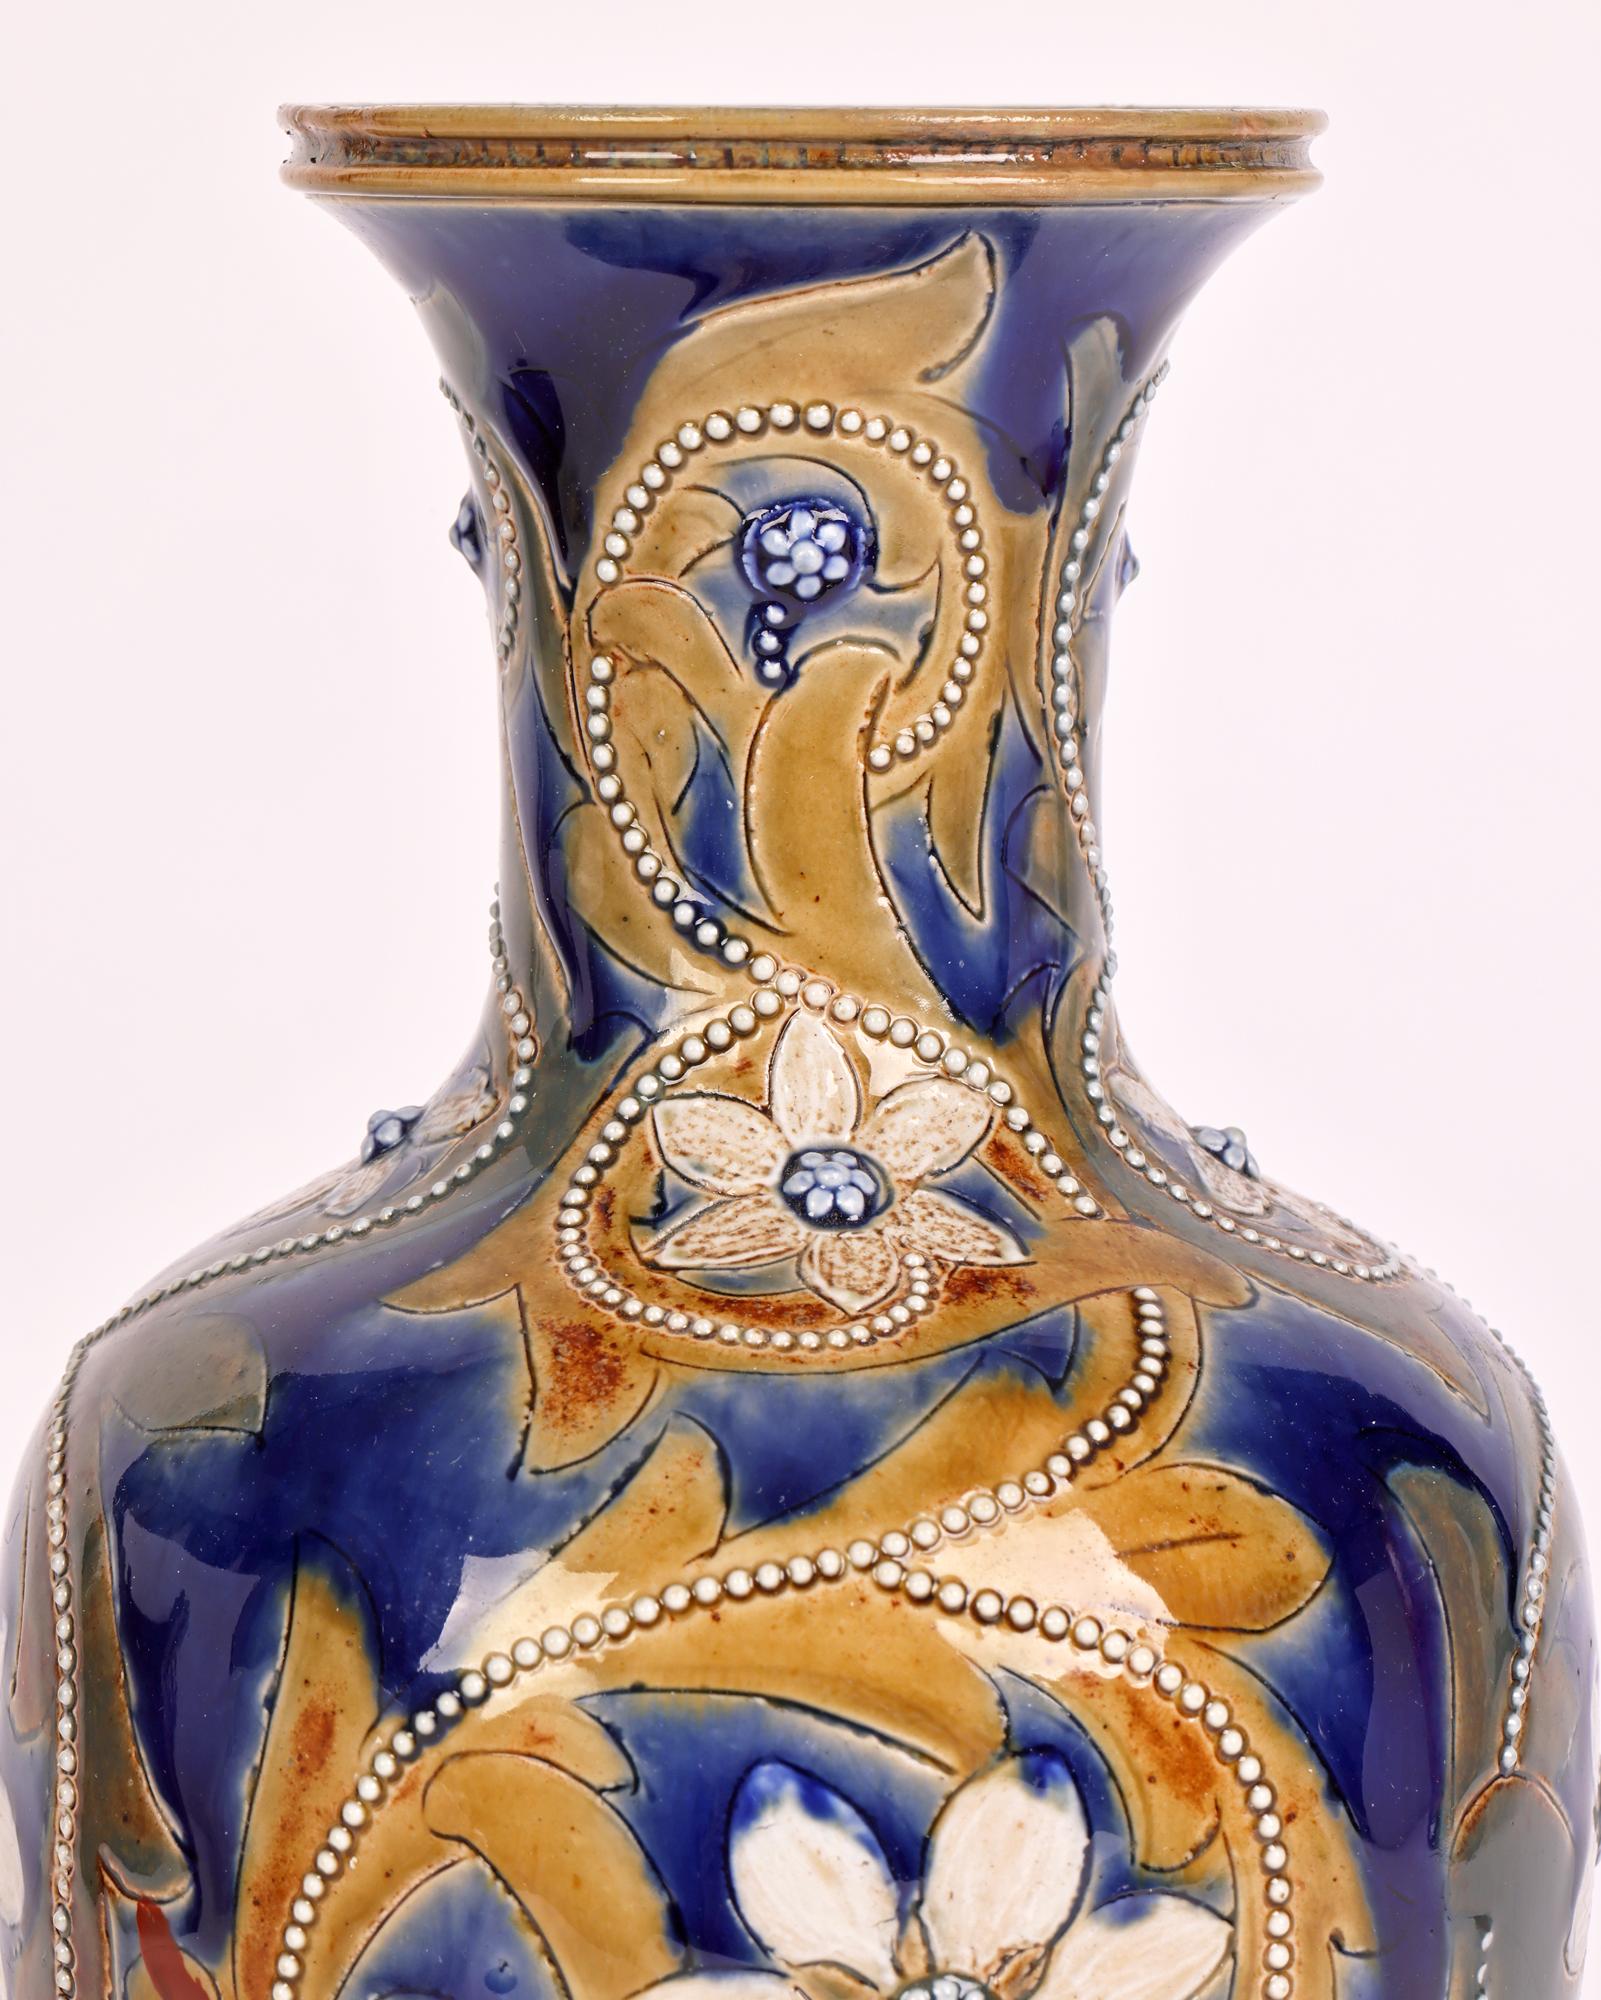 A rare and important Doulton Lambeth Aesthetic Movement trailing floral design vase by renowned and sought-after designer Emily J Edwards dated 1875. 

Emily Edwards was one of the first women designers and decorators at the Lambeth Studios and